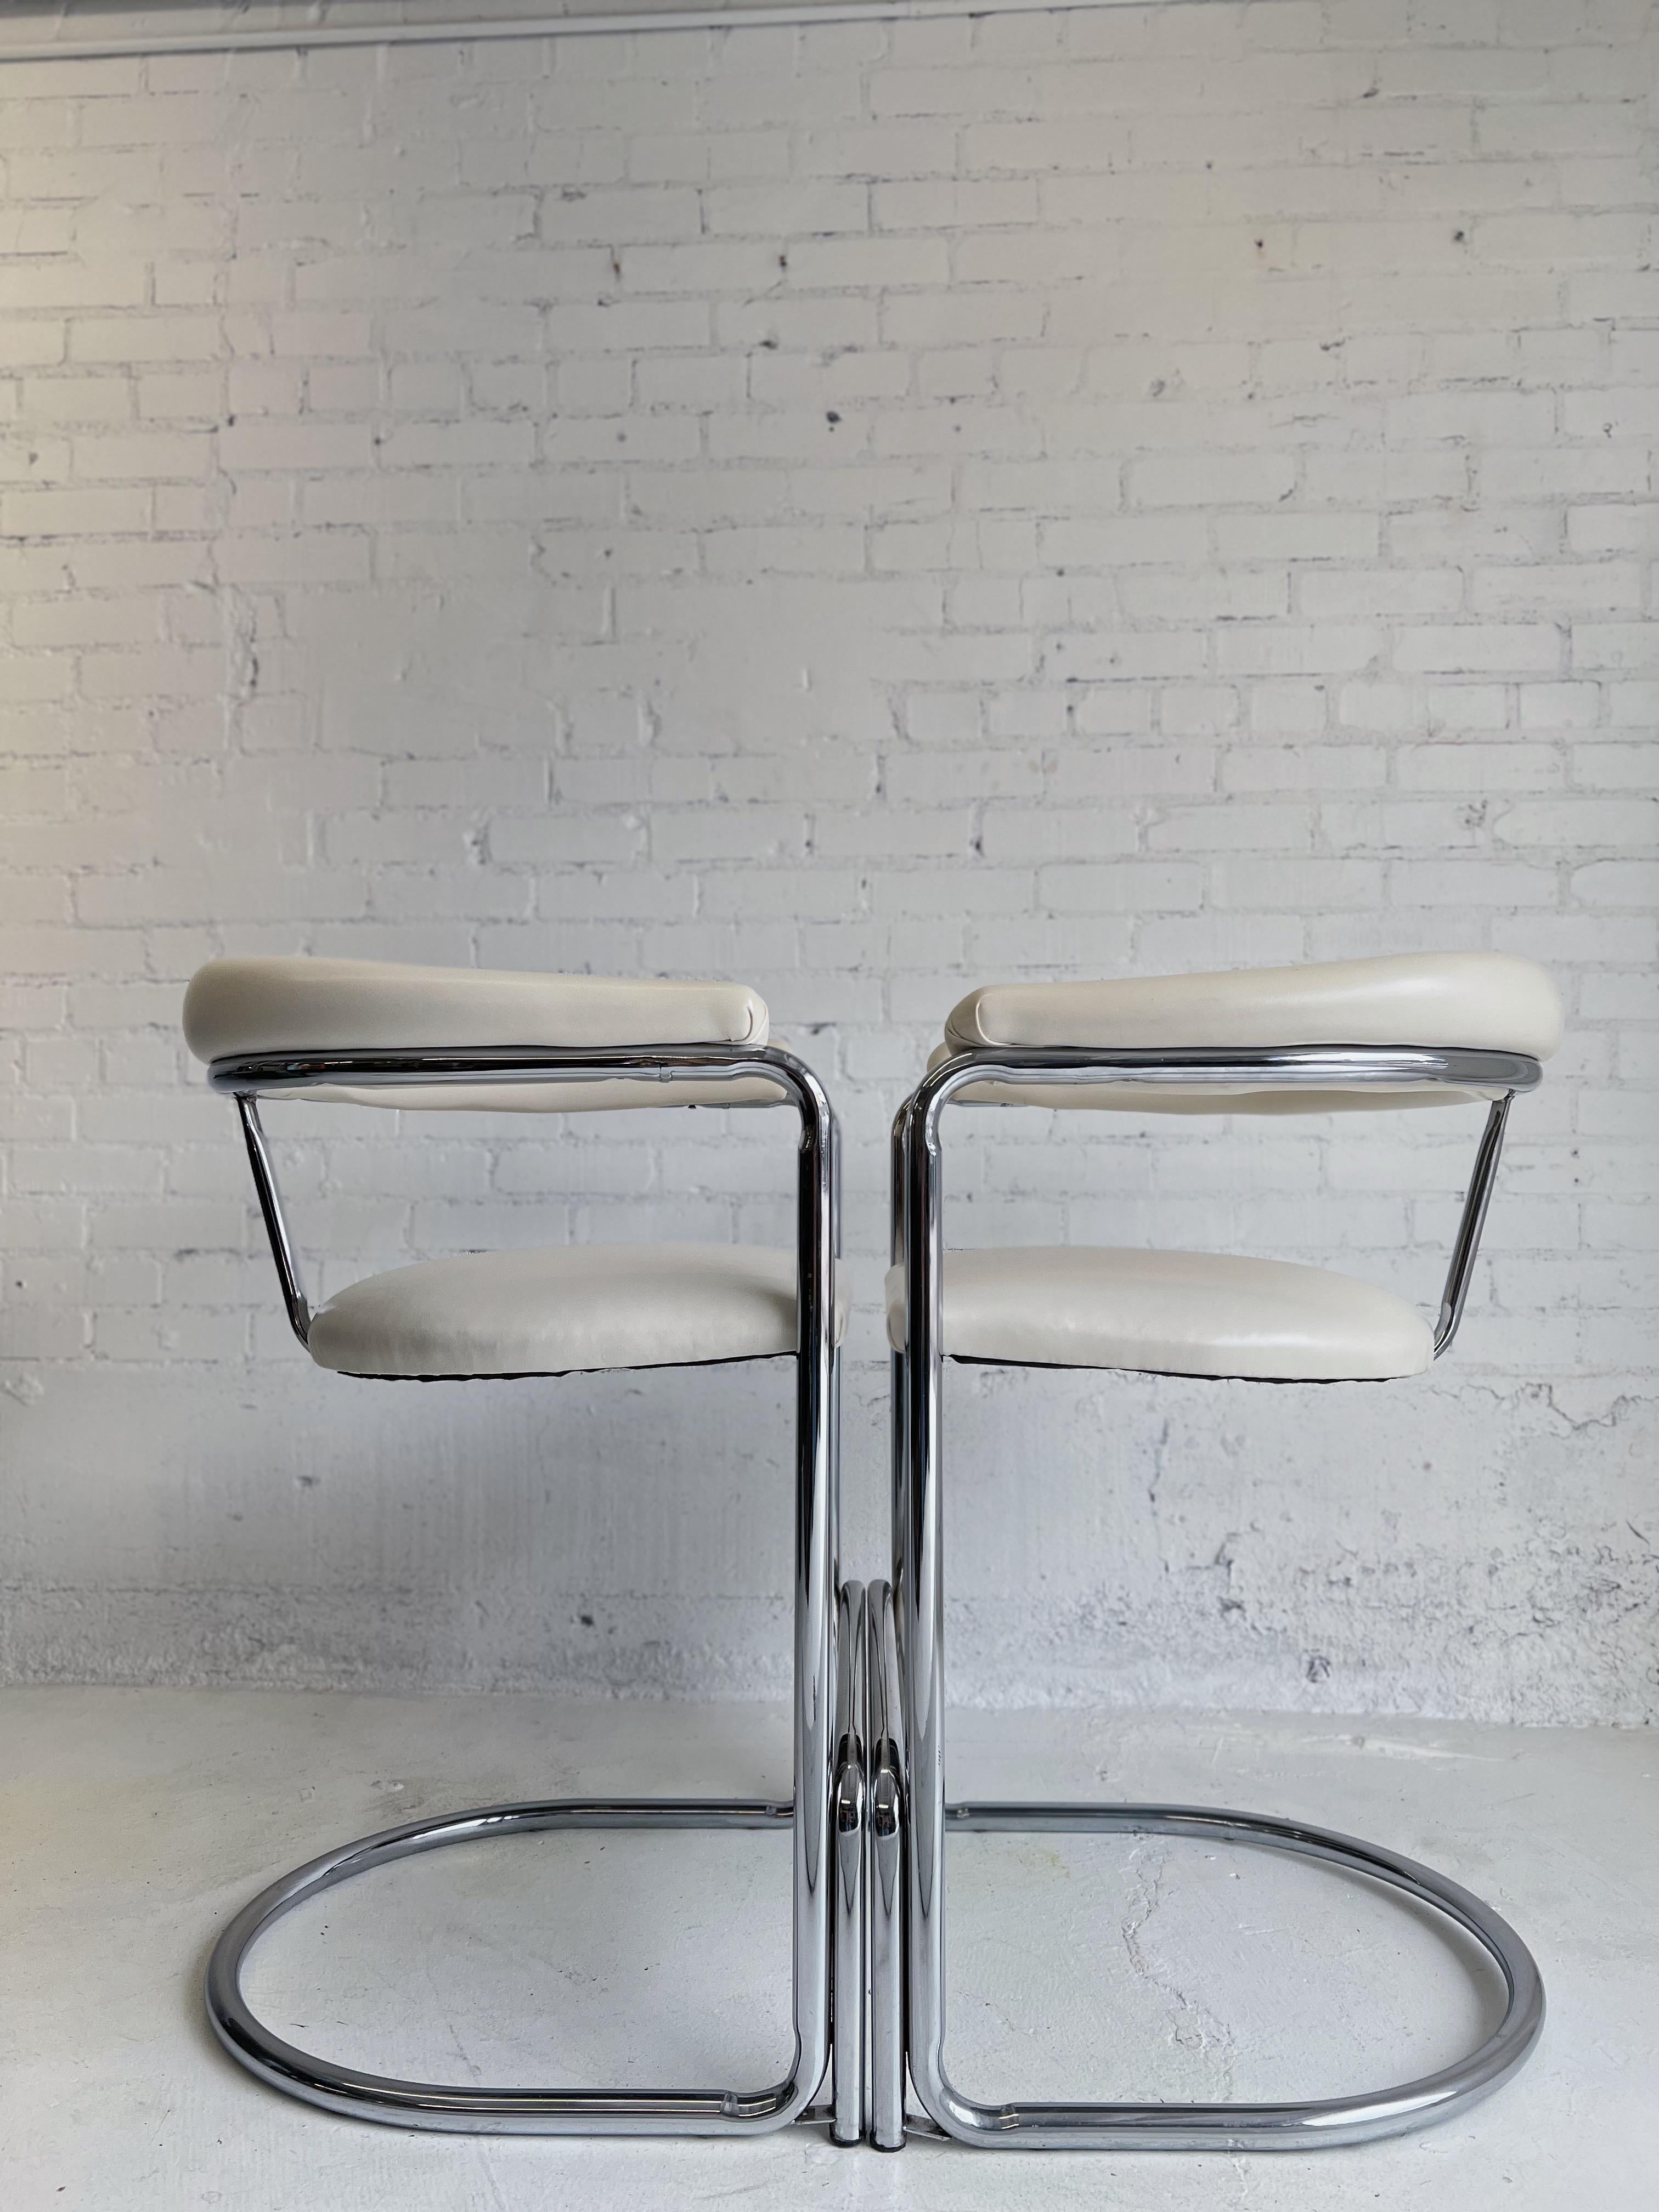 Chrome bar stools designed by Anton Lorenz for Thonet in 1929. Stools feature off-white faux leather upholstered seat and backrest with chrome-plated tubular steel frame and stabilizing foot rest bars. Stools are in good vintage condition with minor